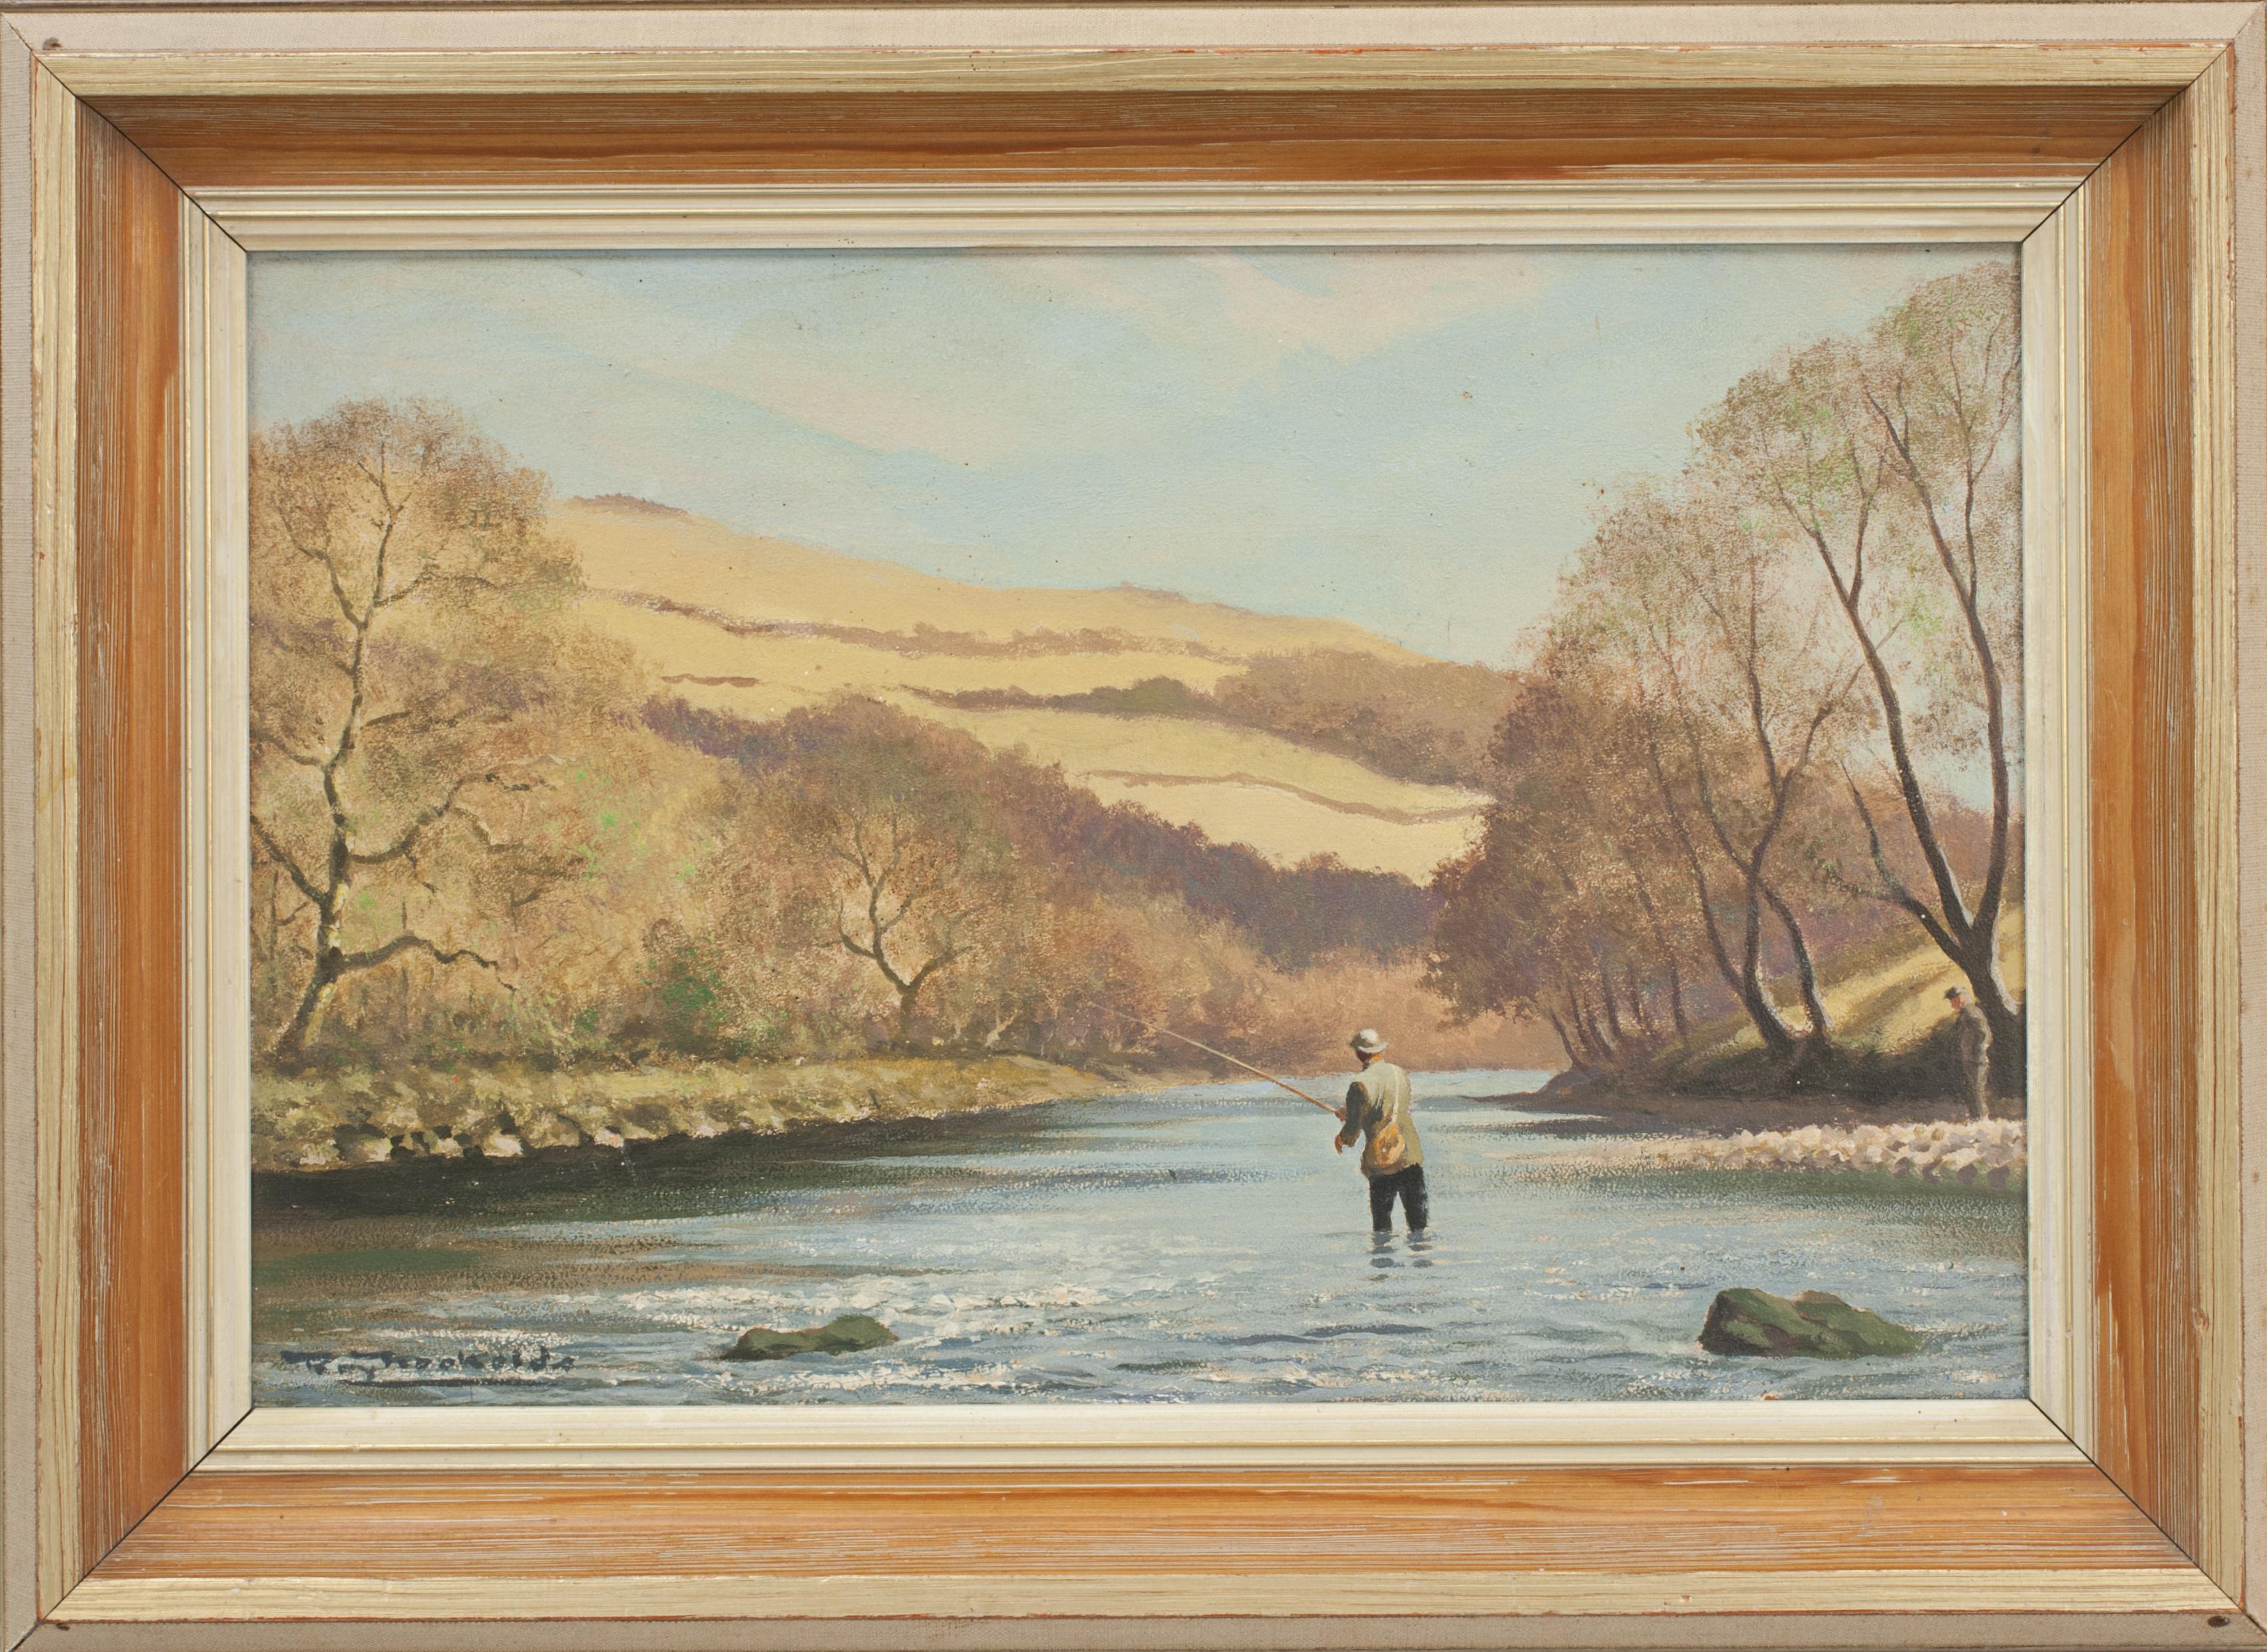 Sporting Art Vintage Fishing Oil Painting on Board Roy Nockolds